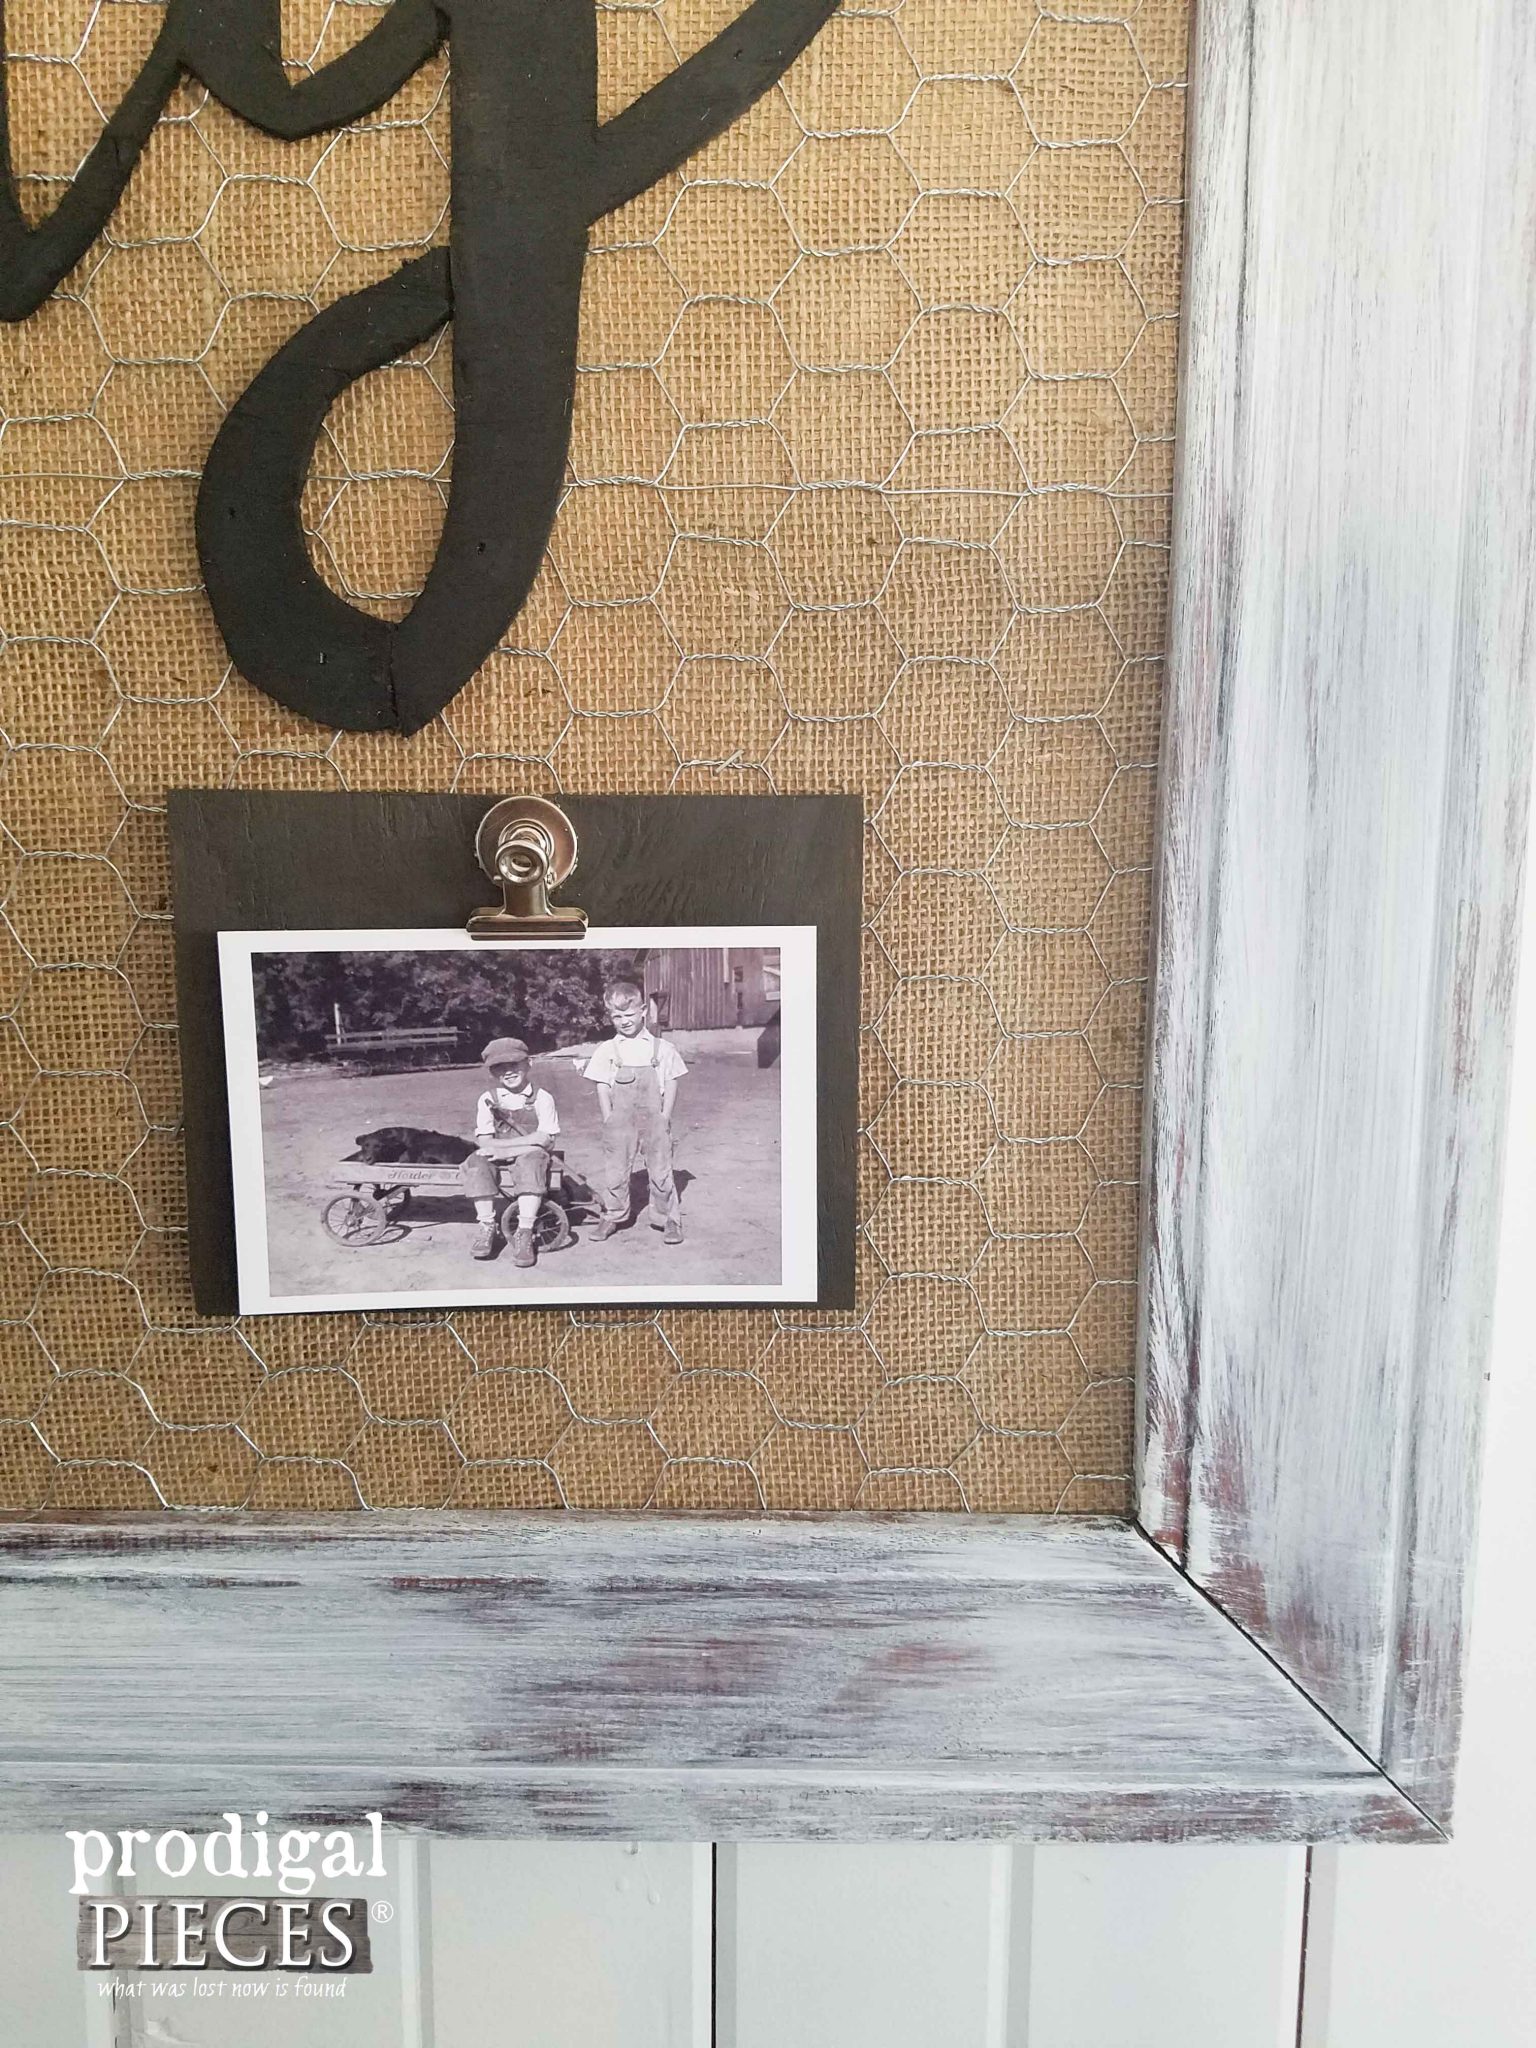 Burlap and Chicken Wire Framed Memory Board by Prodigal Pieces | prodigalpieces.com